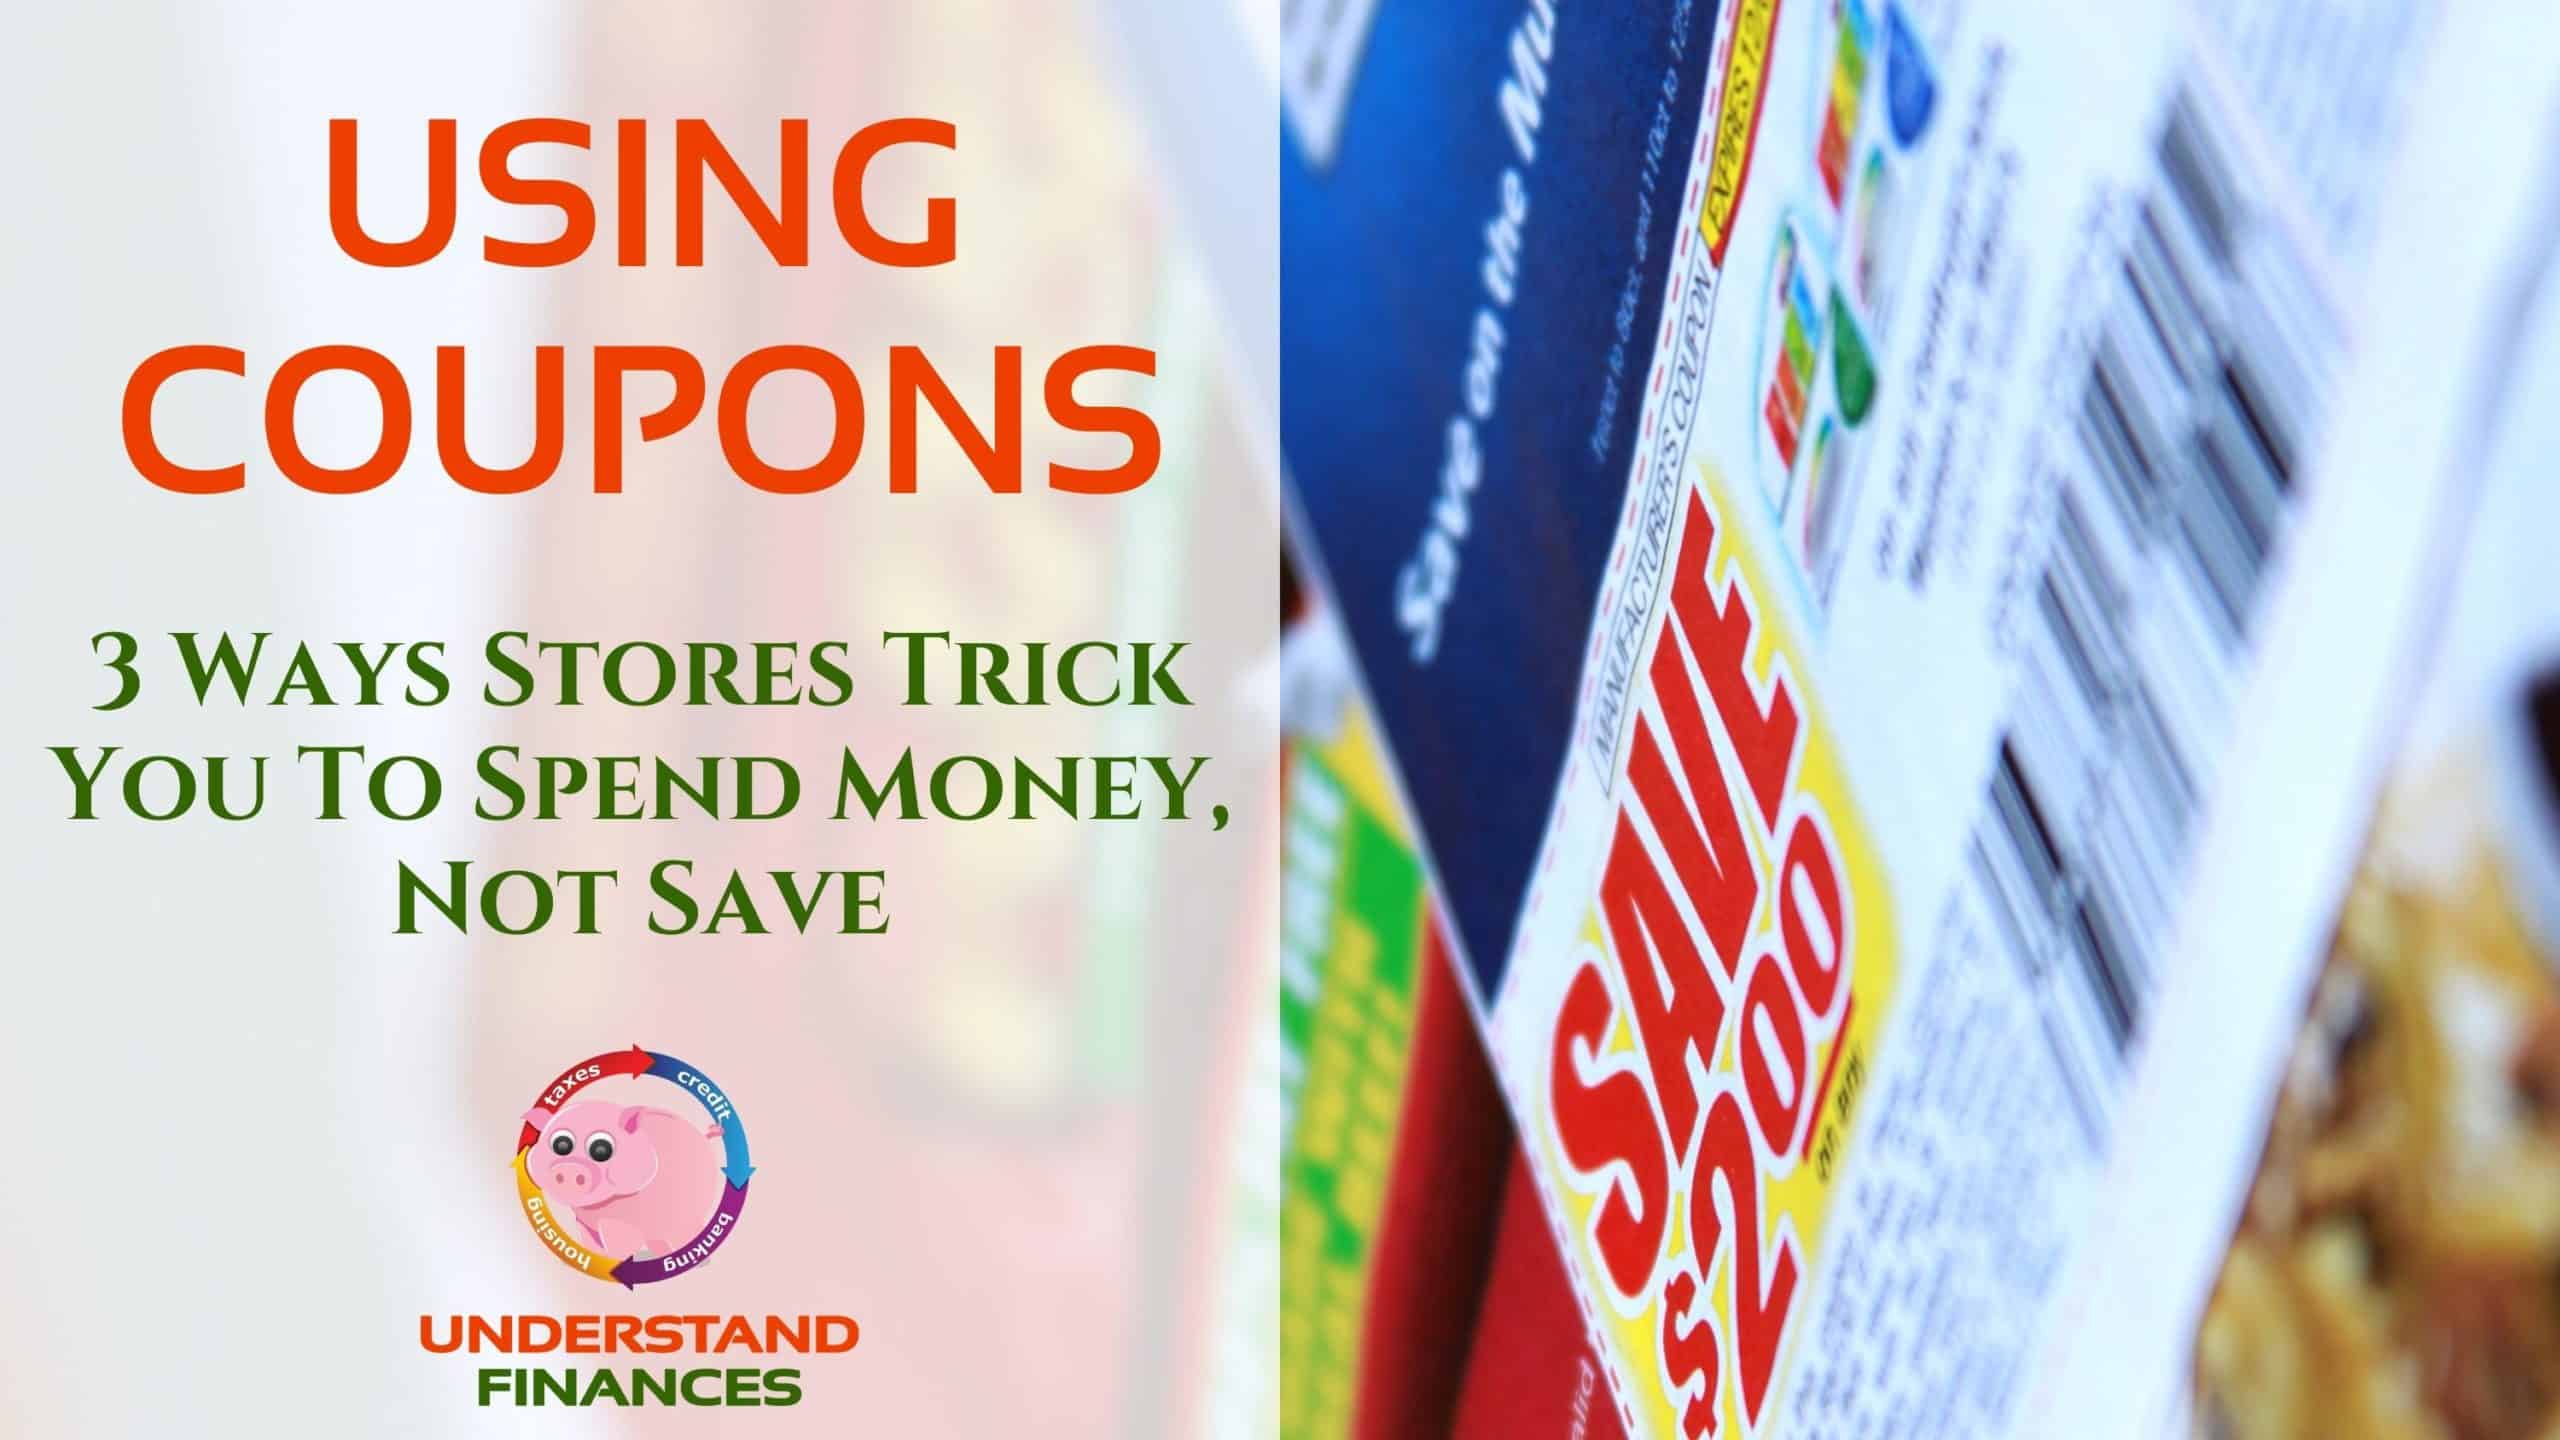 Using Coupons: 3 Ways Stores Trick You To Spend Money, Not Save